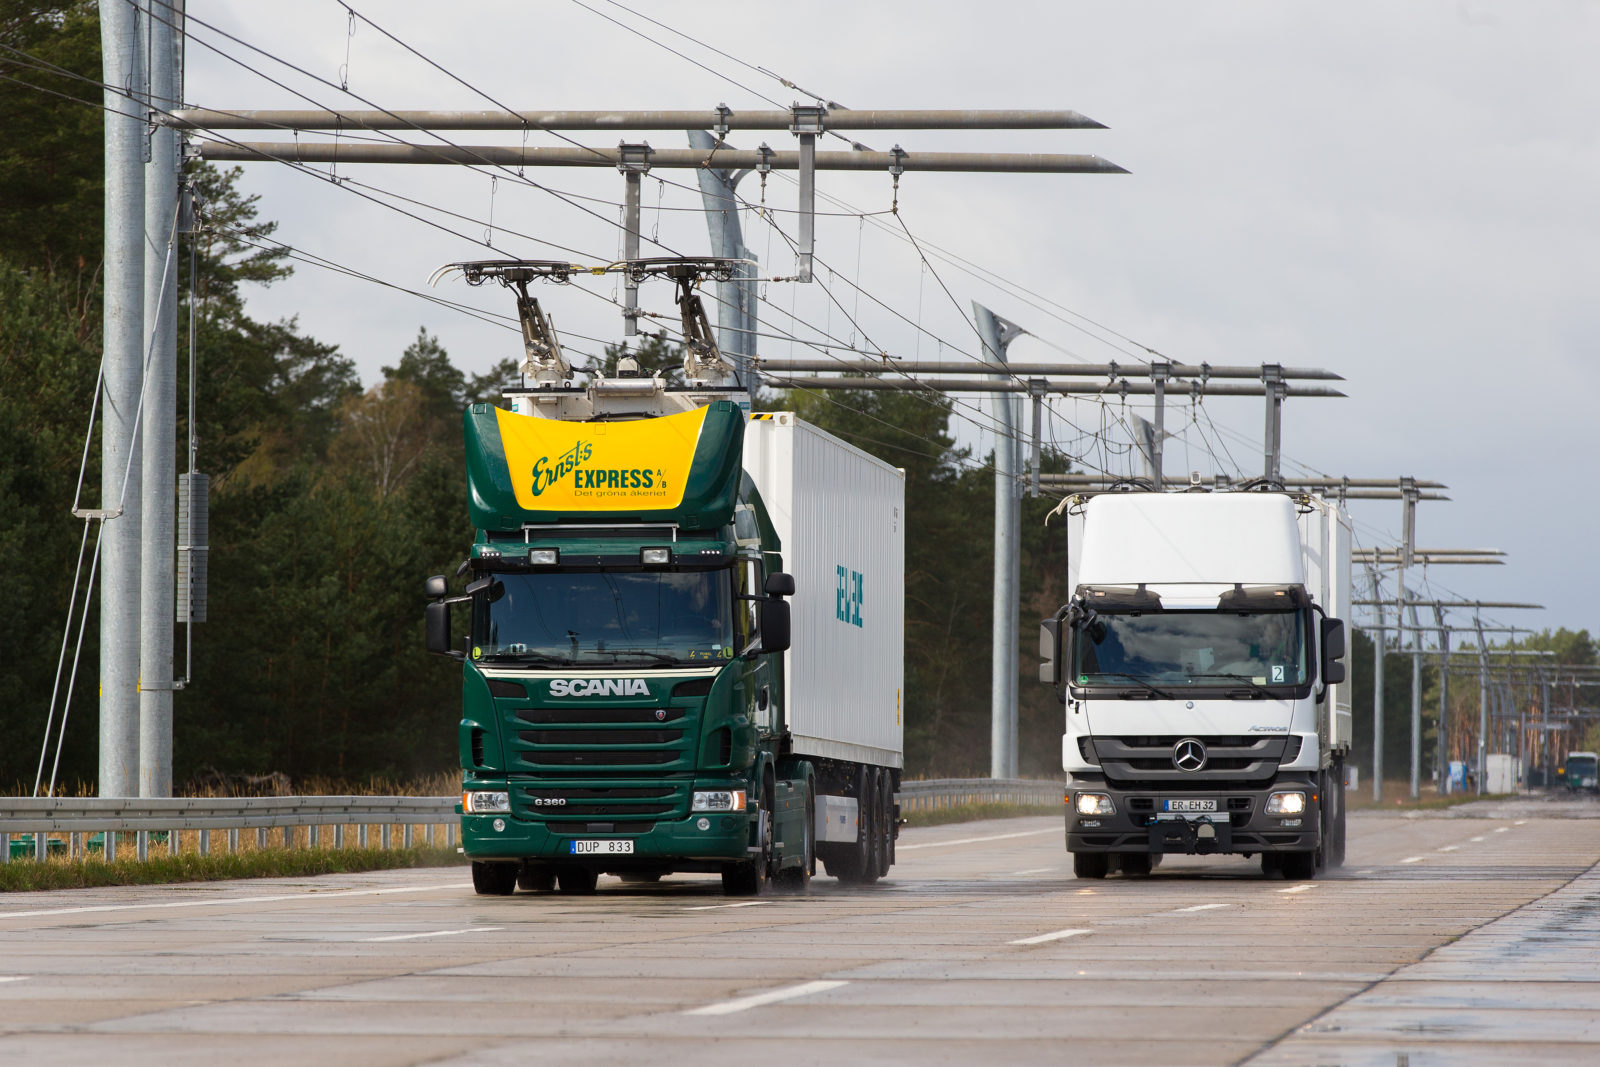 eHighway is a reliable and environmentally friendly alternative to standard truck transport that supplies trucks with power from an overhead contact line. This means that not only is energy consumption cut by half, but local air pollution is reduced too, making the technology twice as efficient as internal combustion engines.